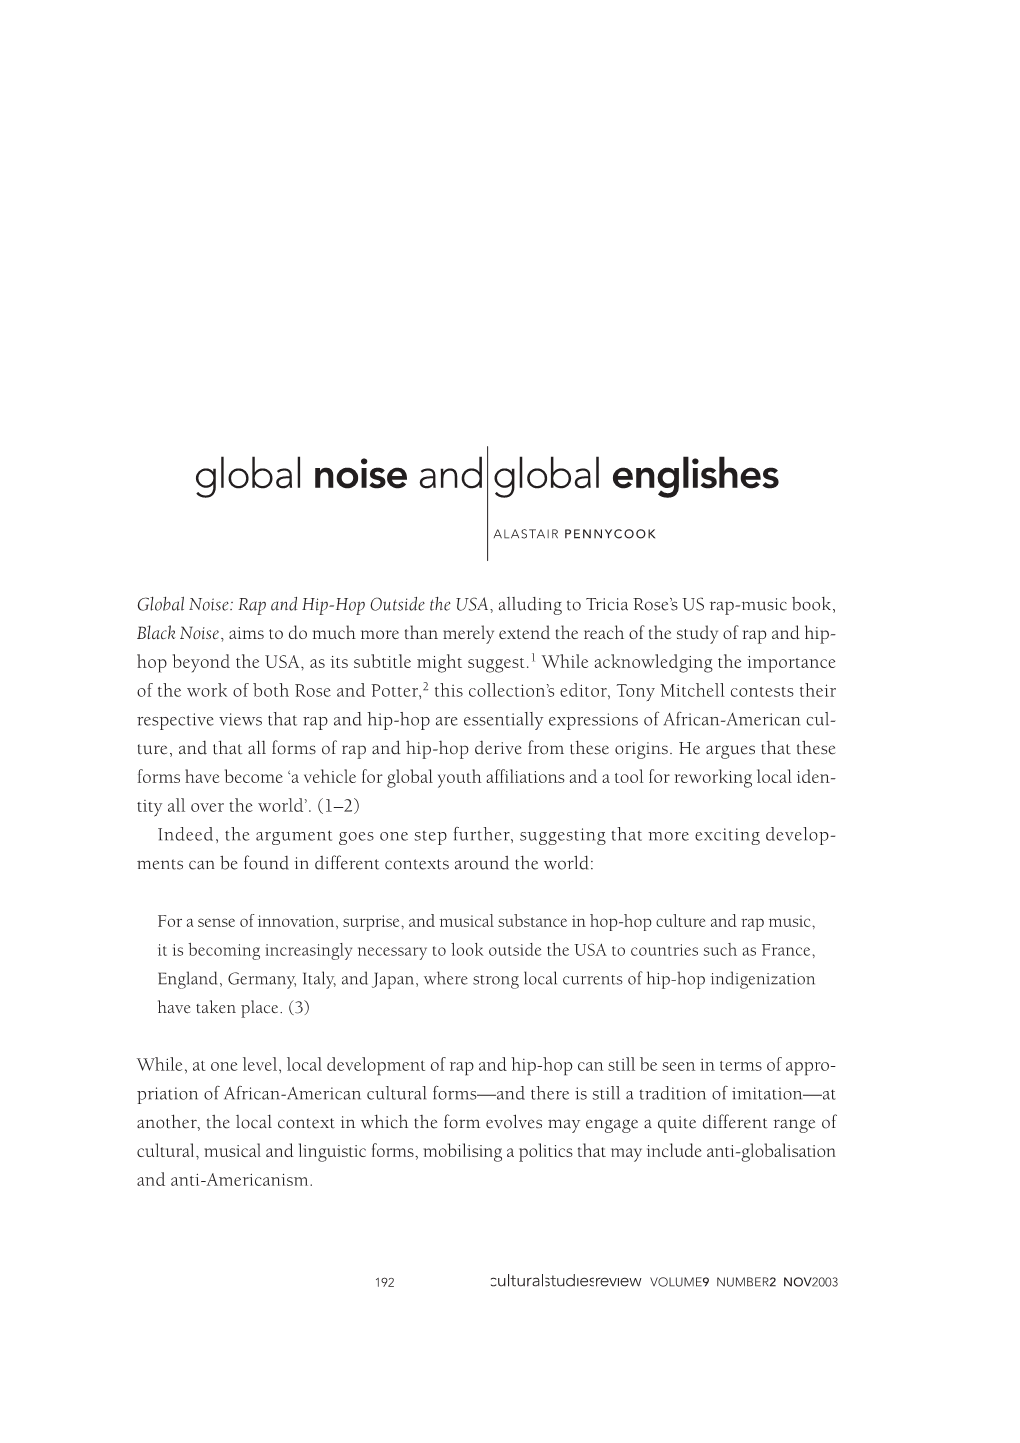 Global Noise and Global Englishes